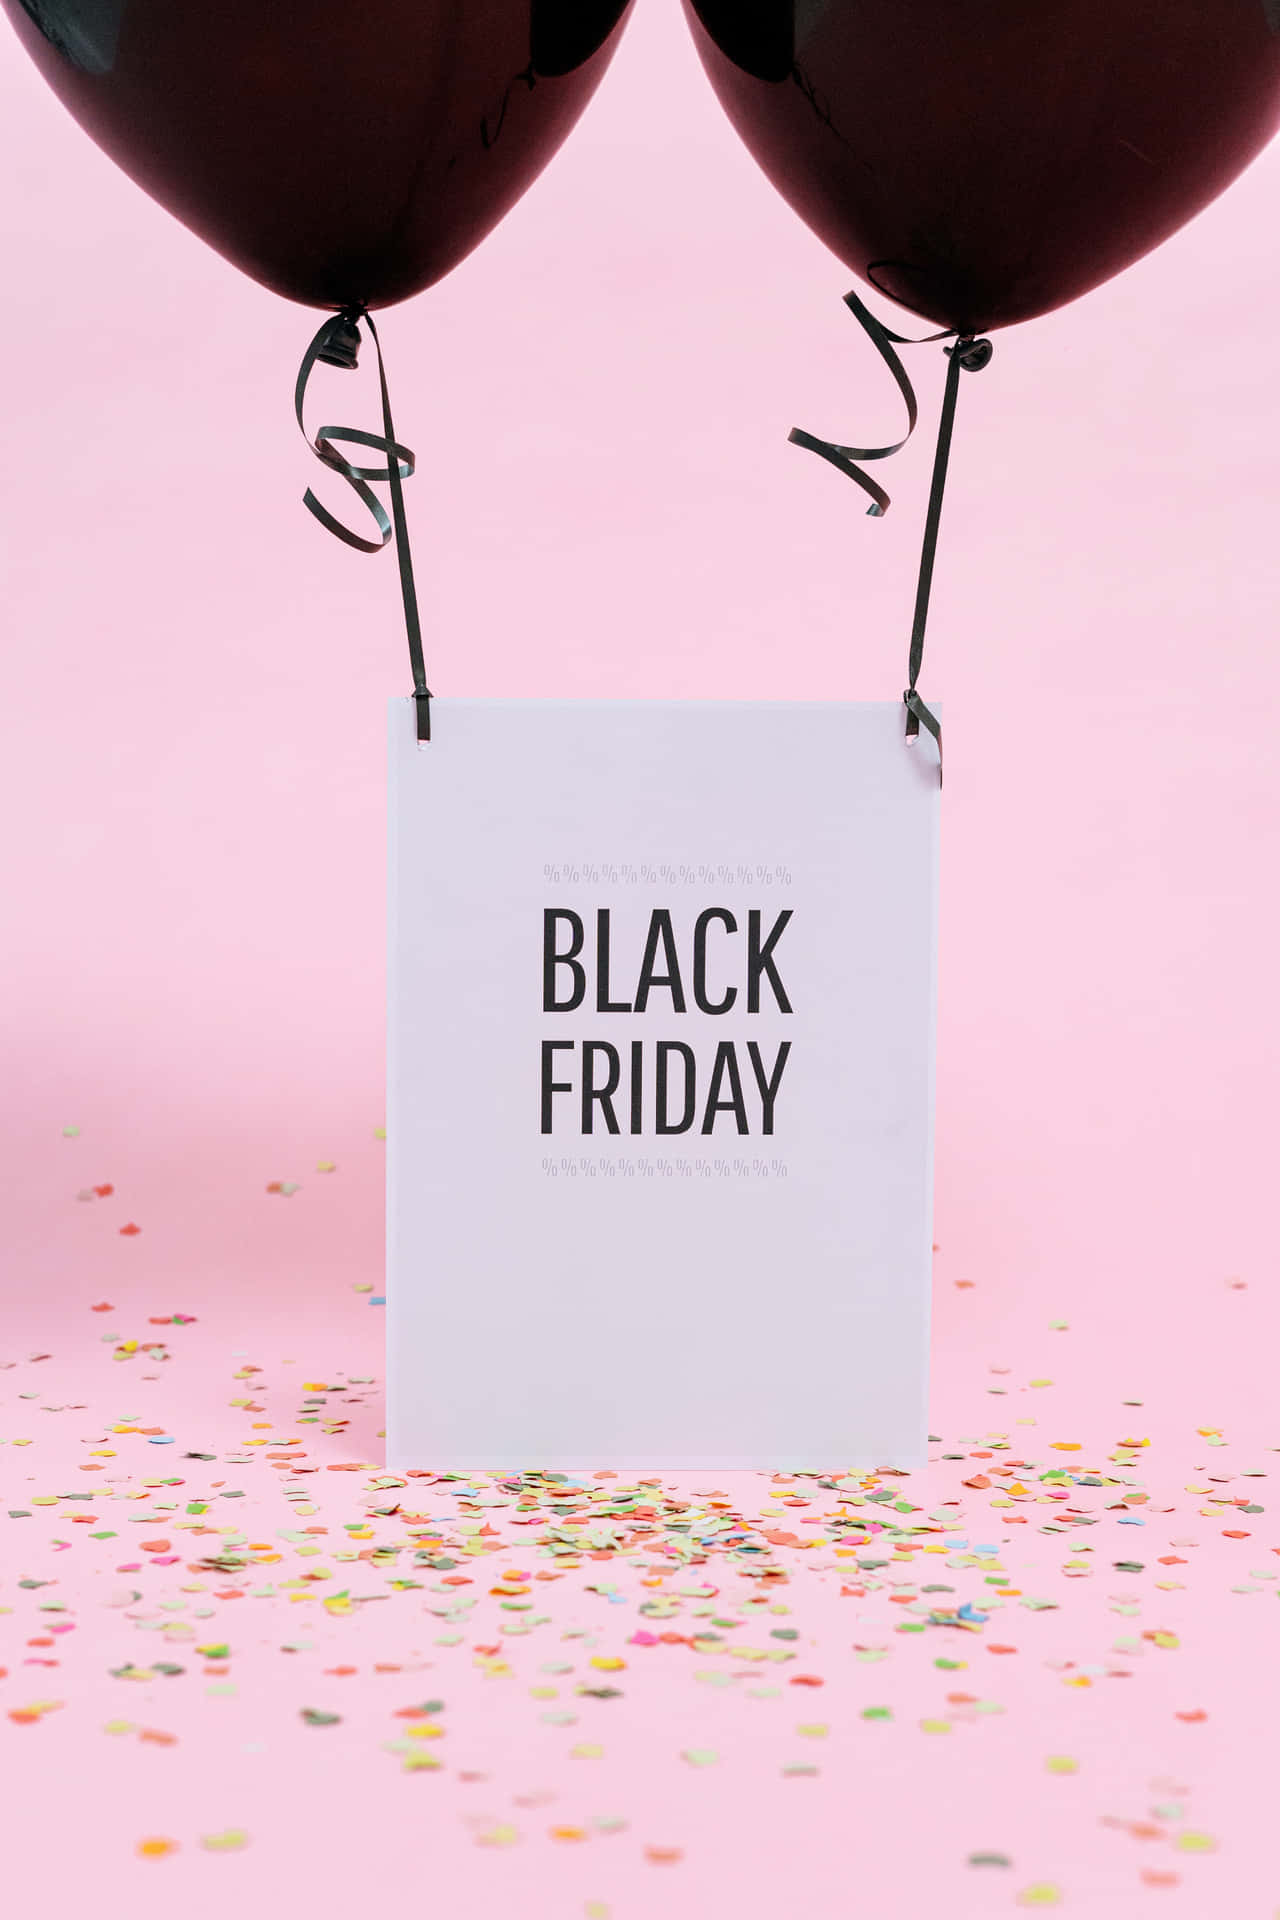 Black Friday Balloons With Confetti On Pink Background